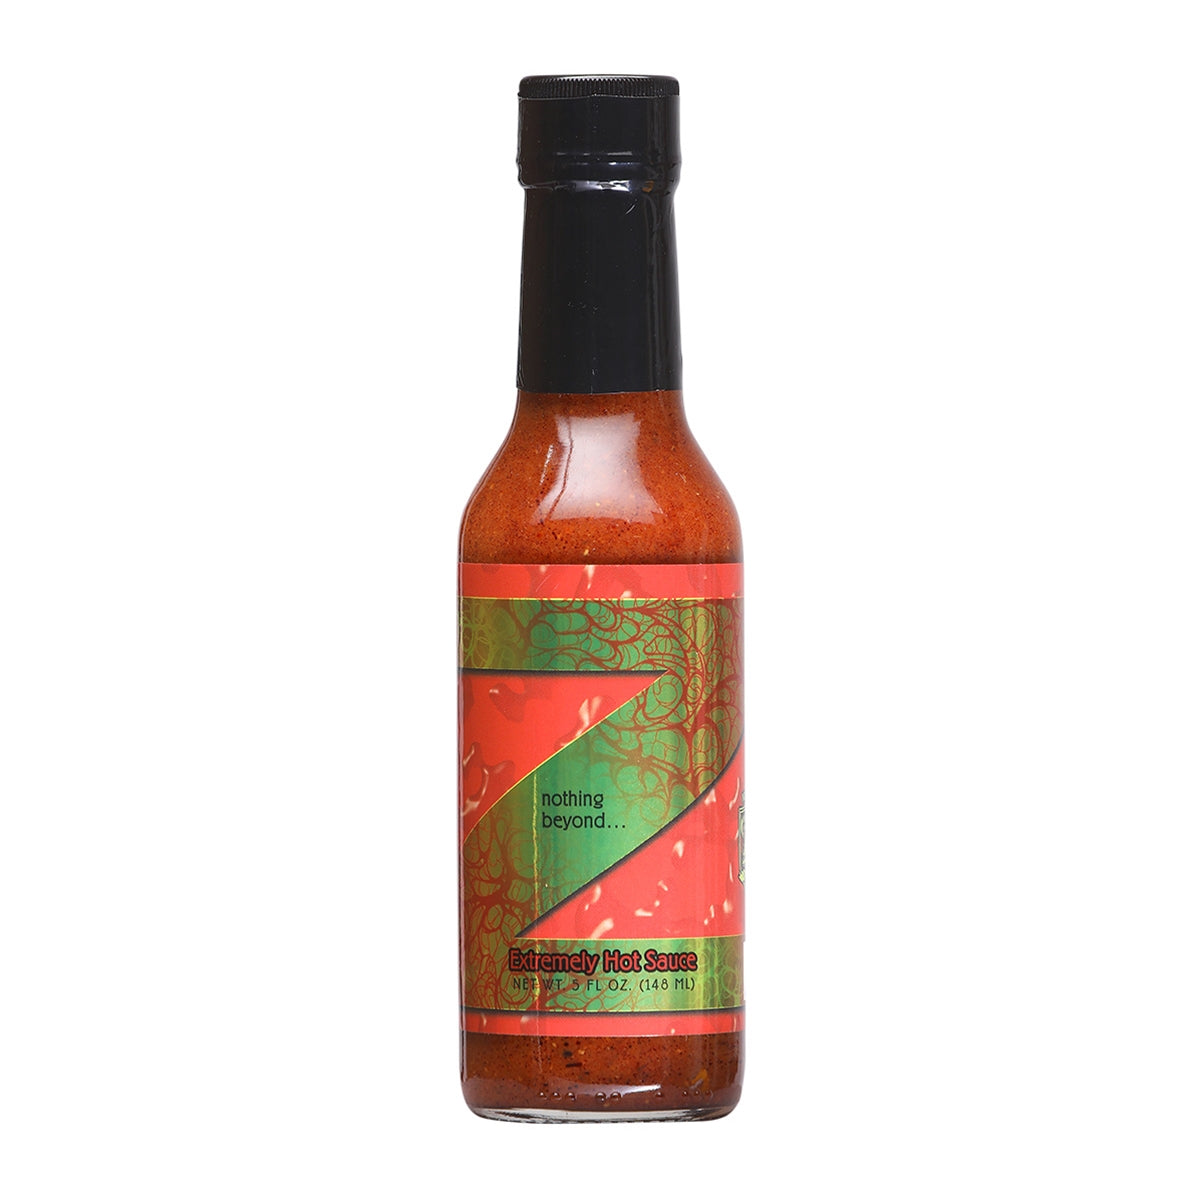 Hot Sauce Z Nothing Beyond Extremely Hot Sauce 5 oz 4 million Scoville 10+++Extract